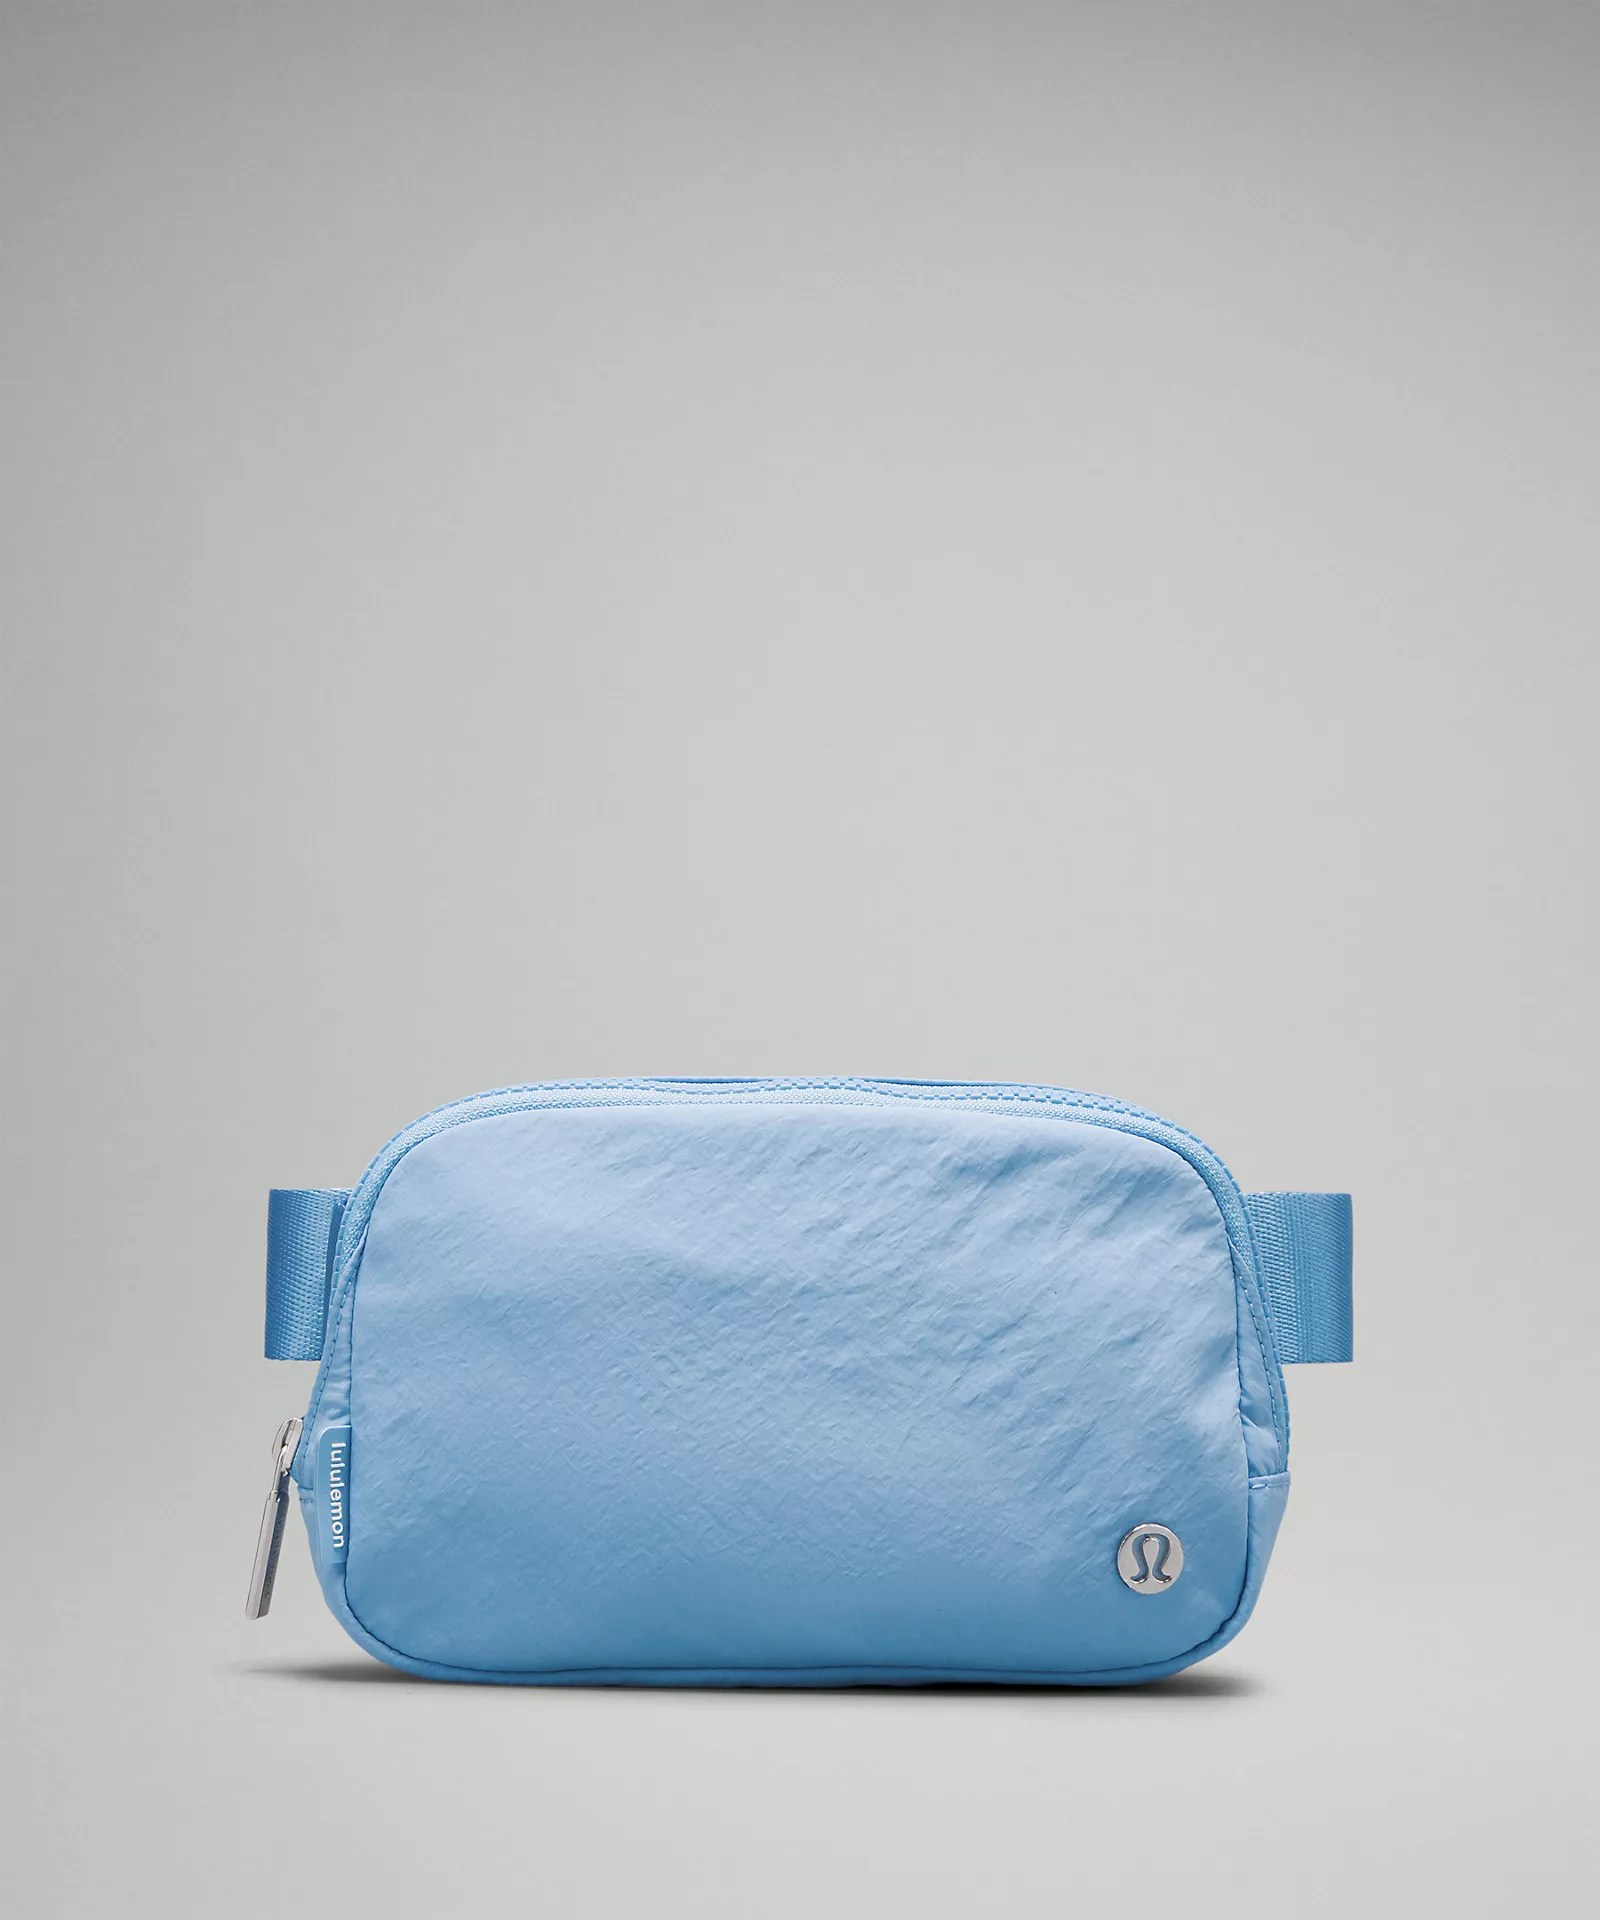 a blue everywhere belt bag, one of the best lululemon products